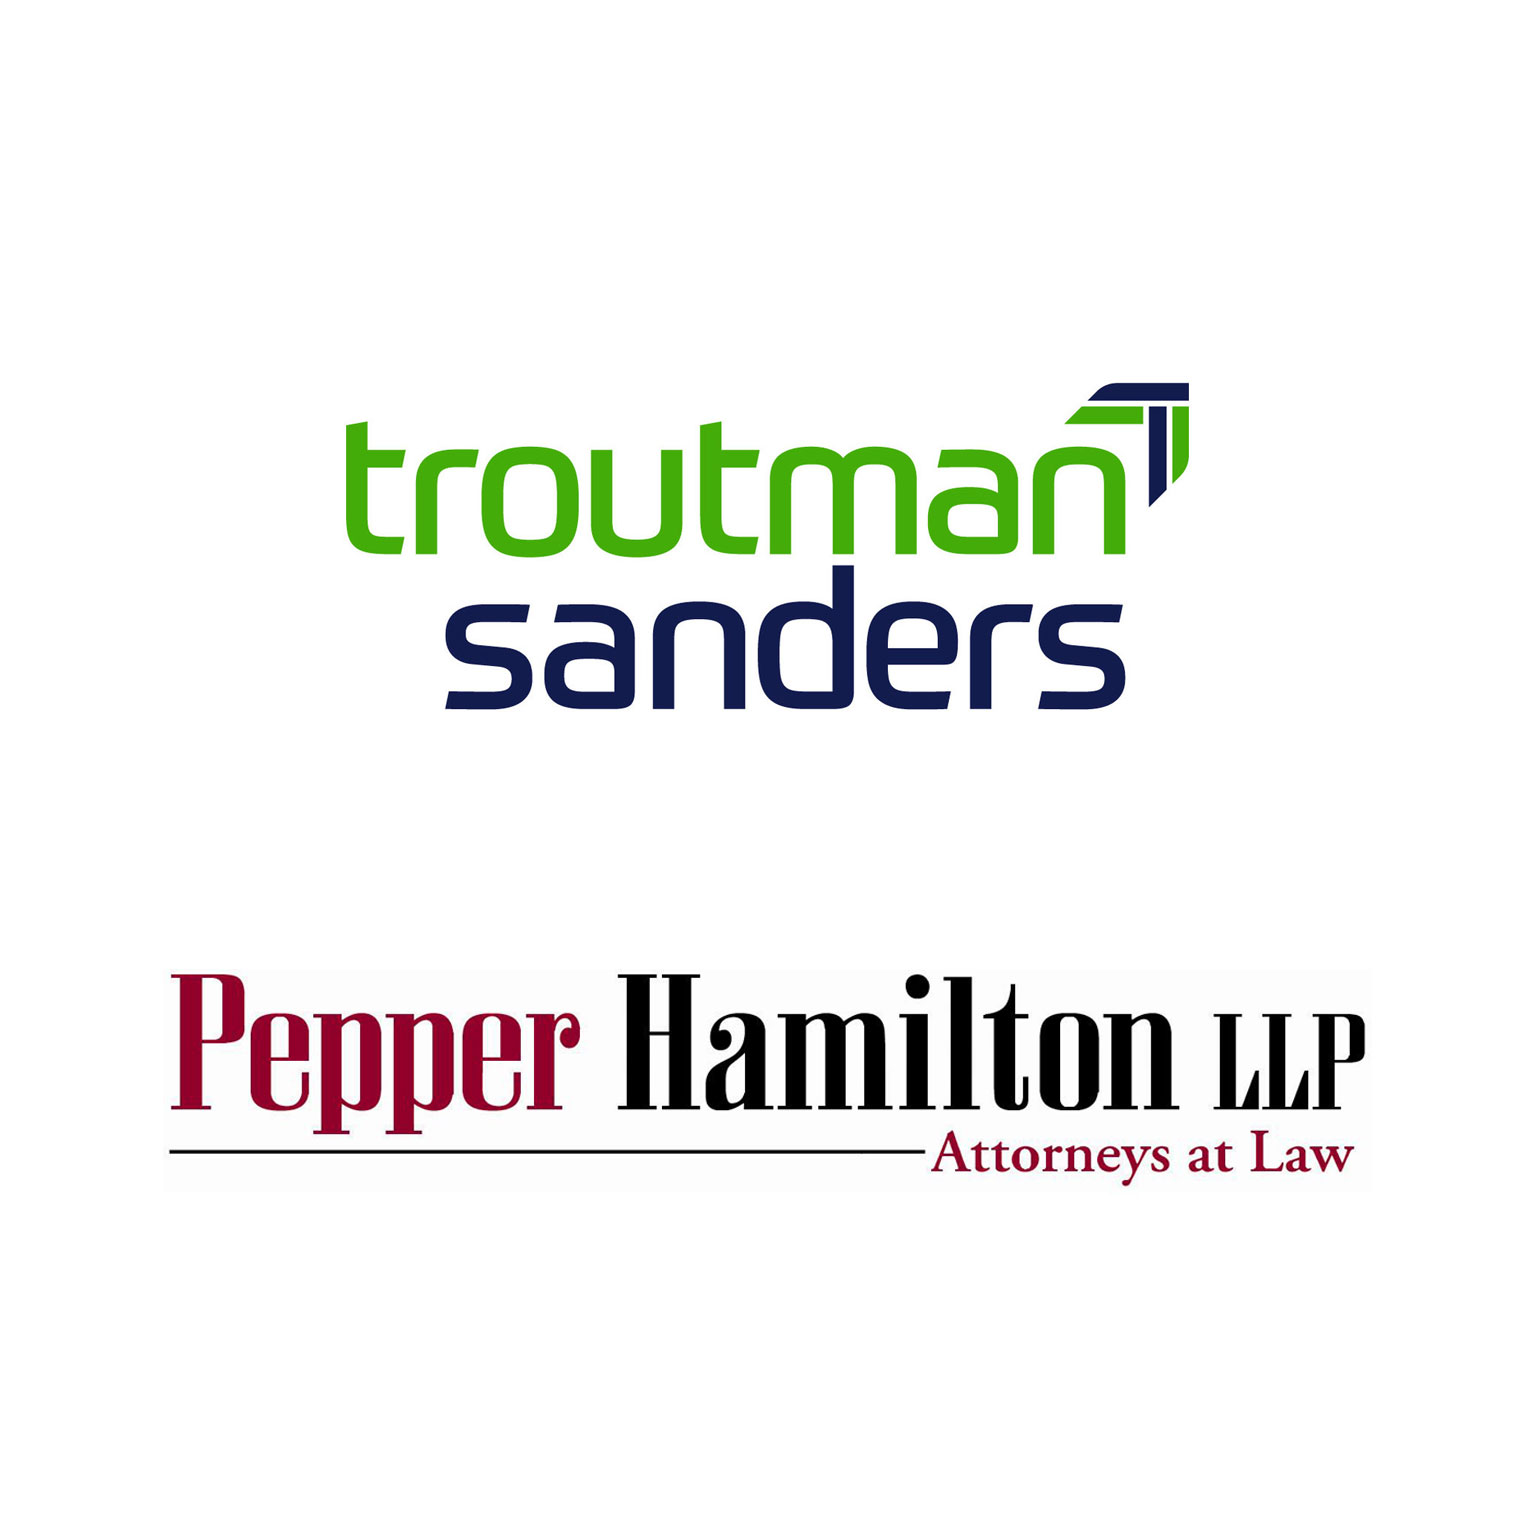 Law firms Troutman Sanders and Pepper Hamilton to merge BioTuesdays